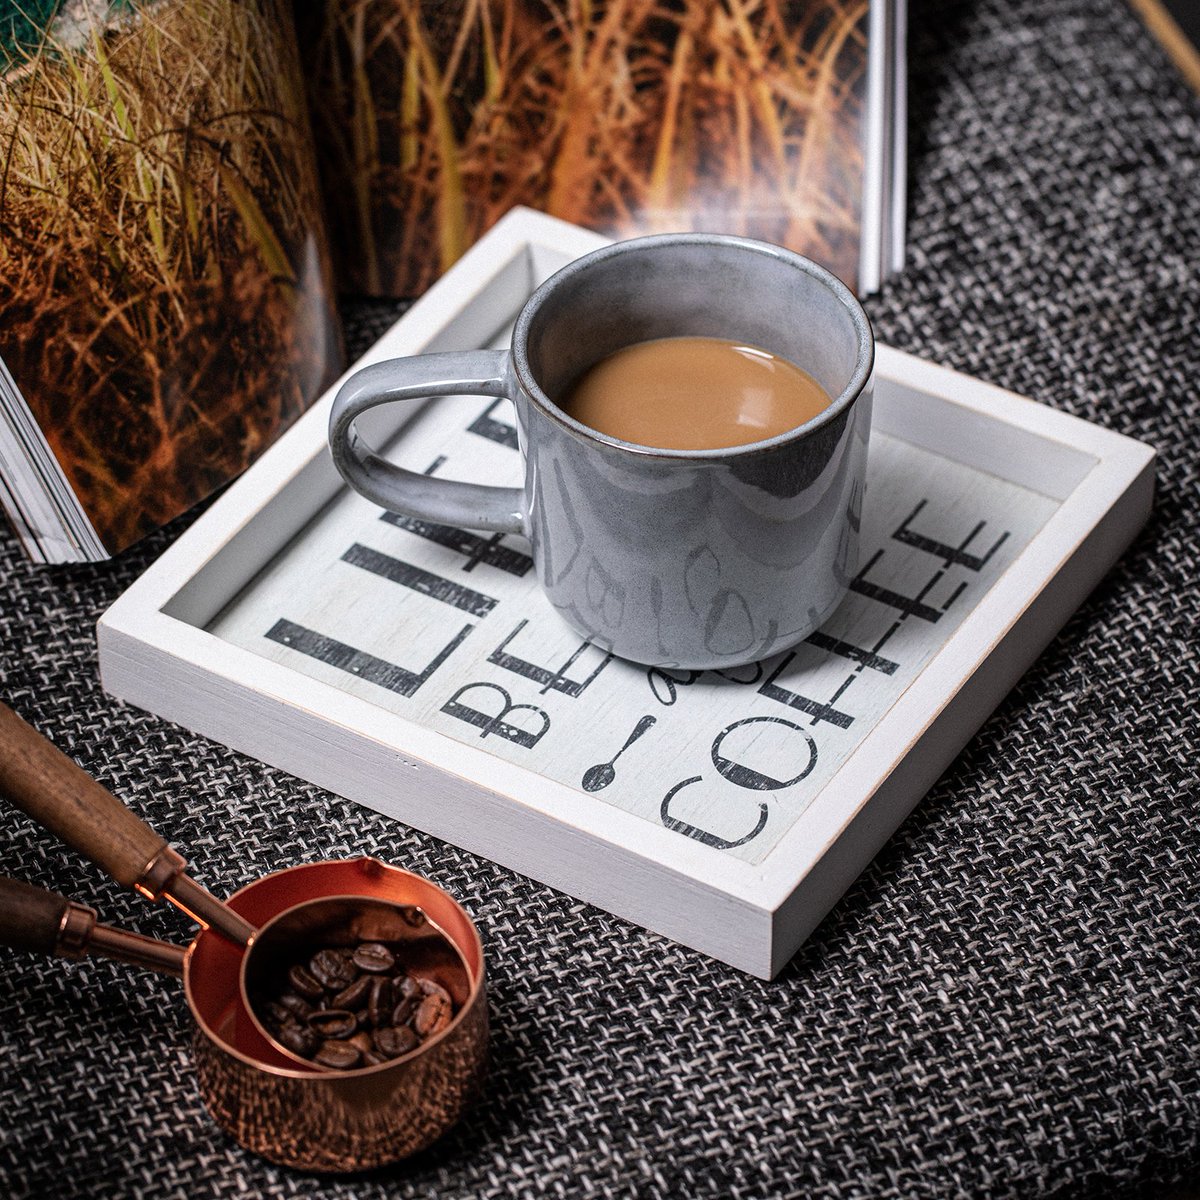 Coffee Table Trays - Oksqw | Fast Free Delivery welloksqw.com/product/Wall-D… #coffeetray #coffeedecor #coffeesign #coffeewalldecor #wallsign #coffeebar #coffeebardecor